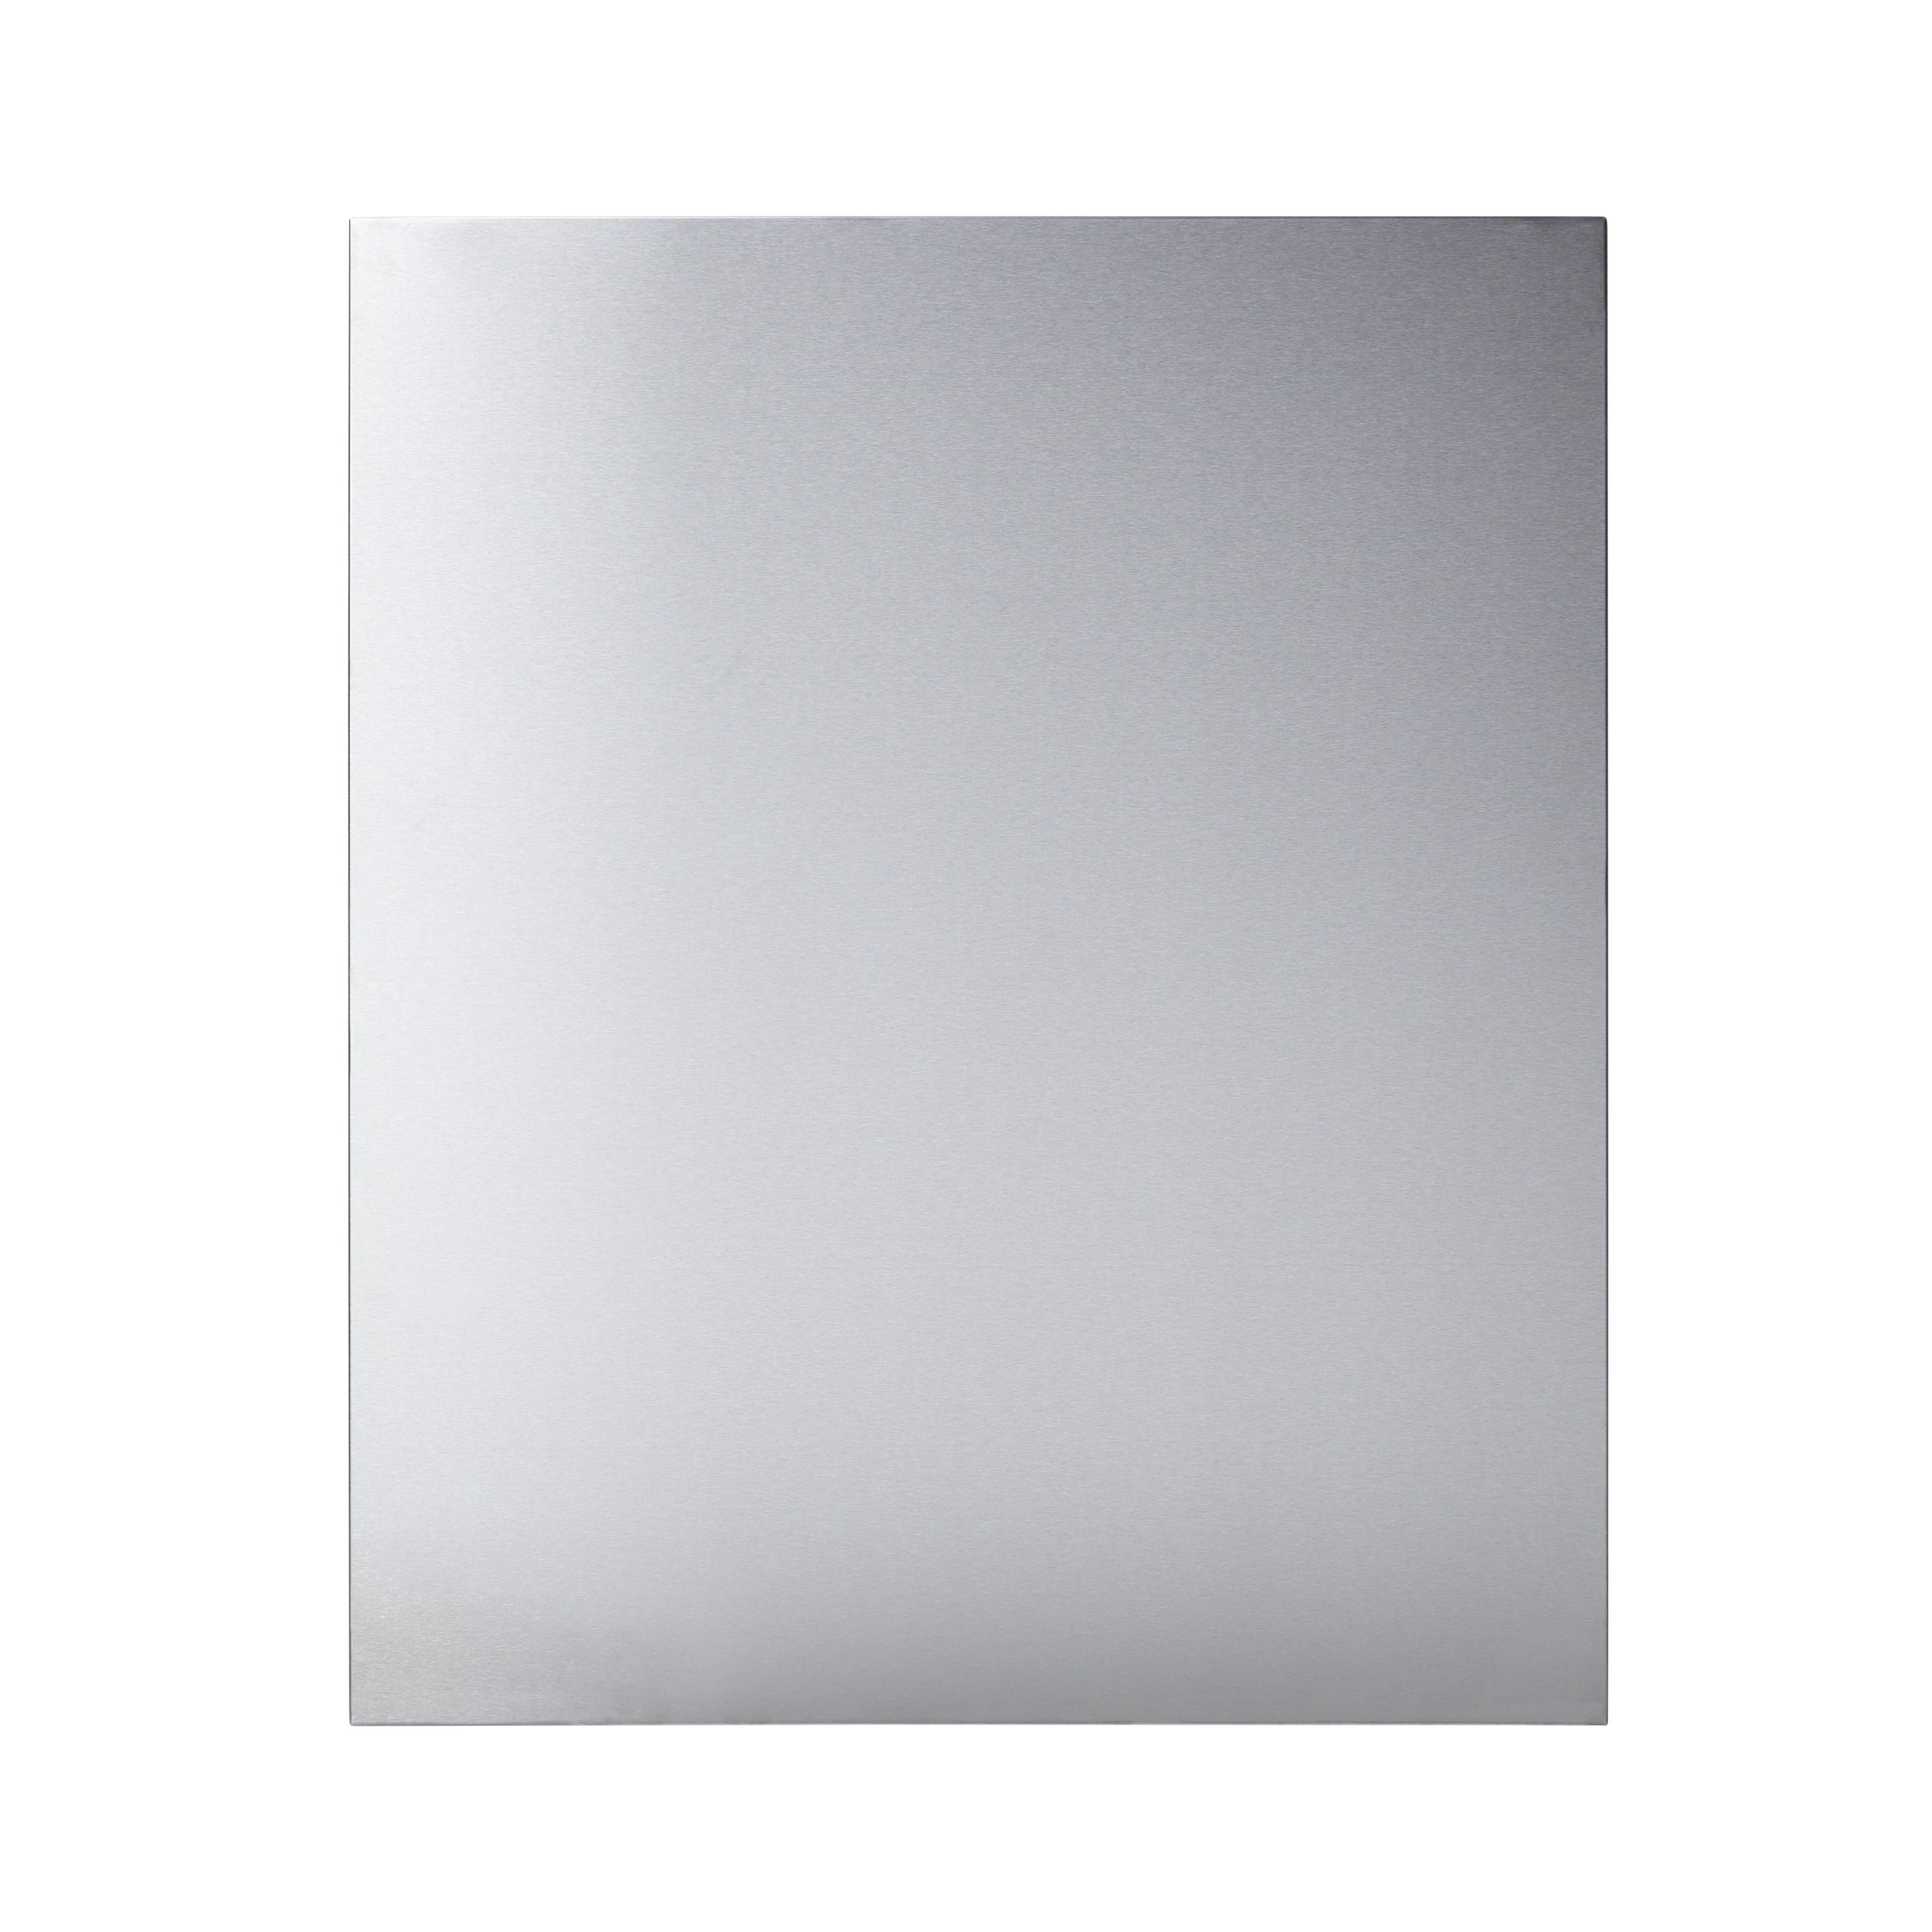 GoodHome Kasei Polished Brushed effect Stainless steel Splashback, (H)800mm (W)900mm (T)10mm